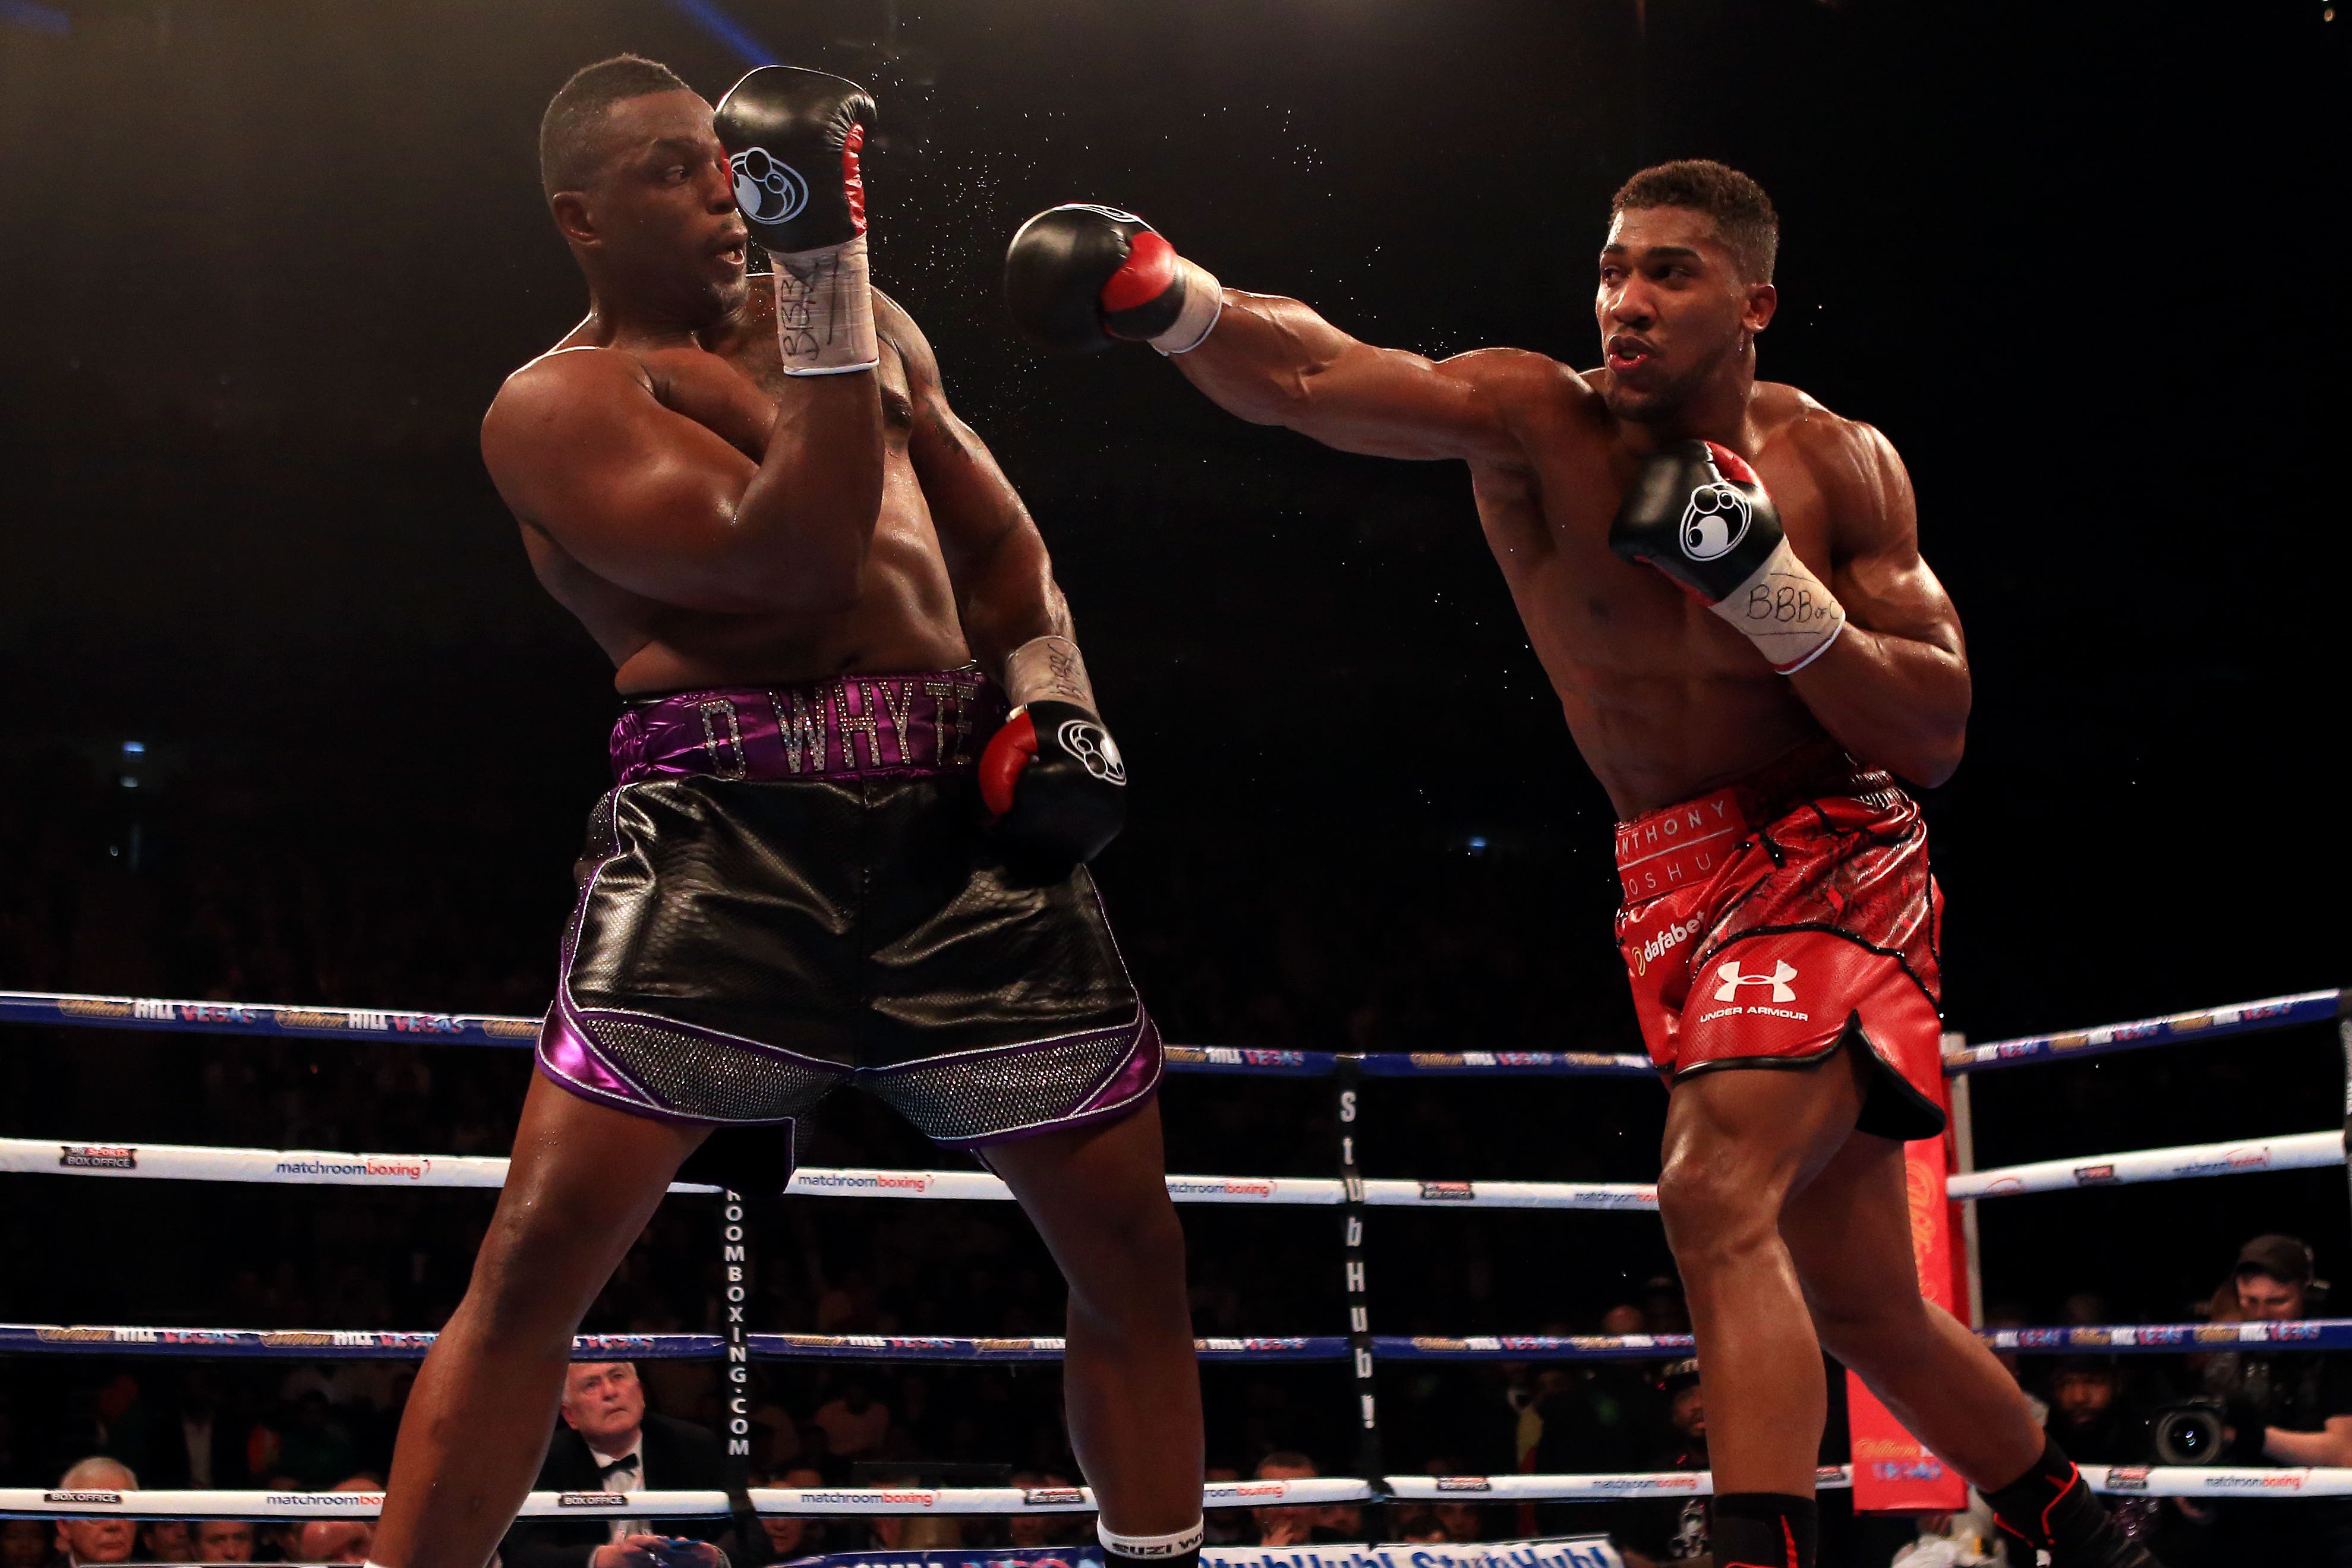 Joshua knocked out Whyte in 2015, and the pair were due for a rematch this week